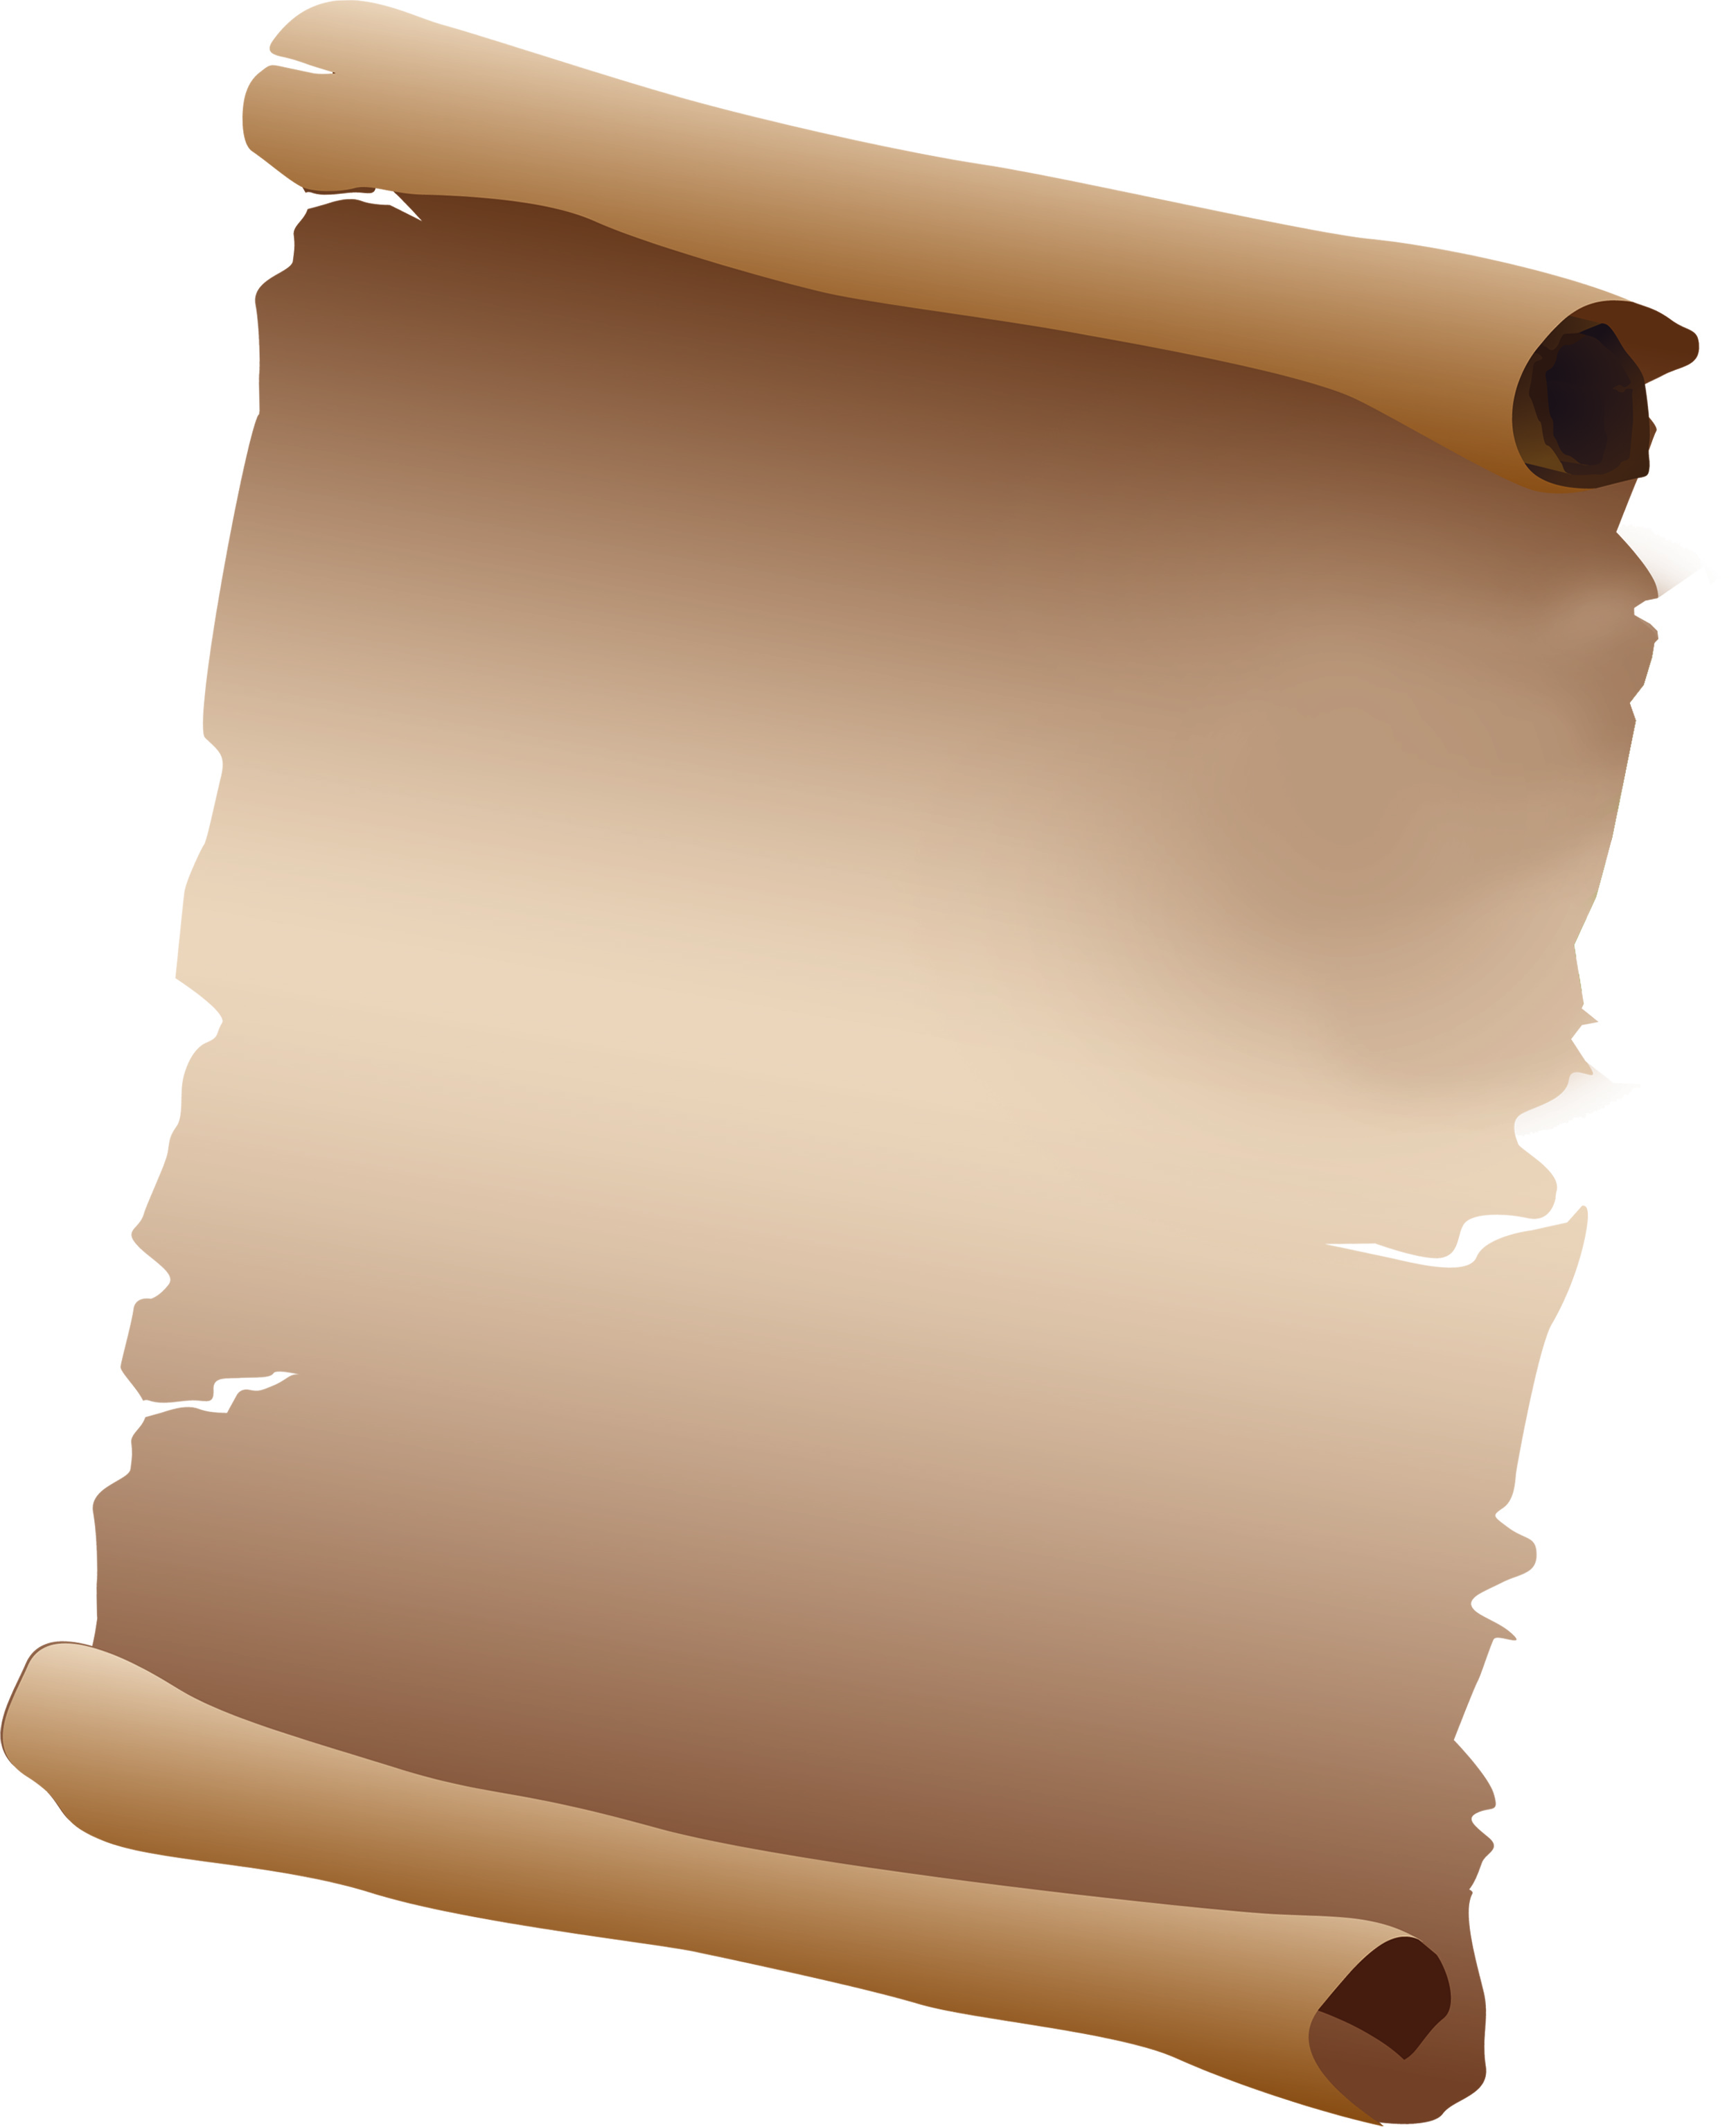 Old scroll paper clipart